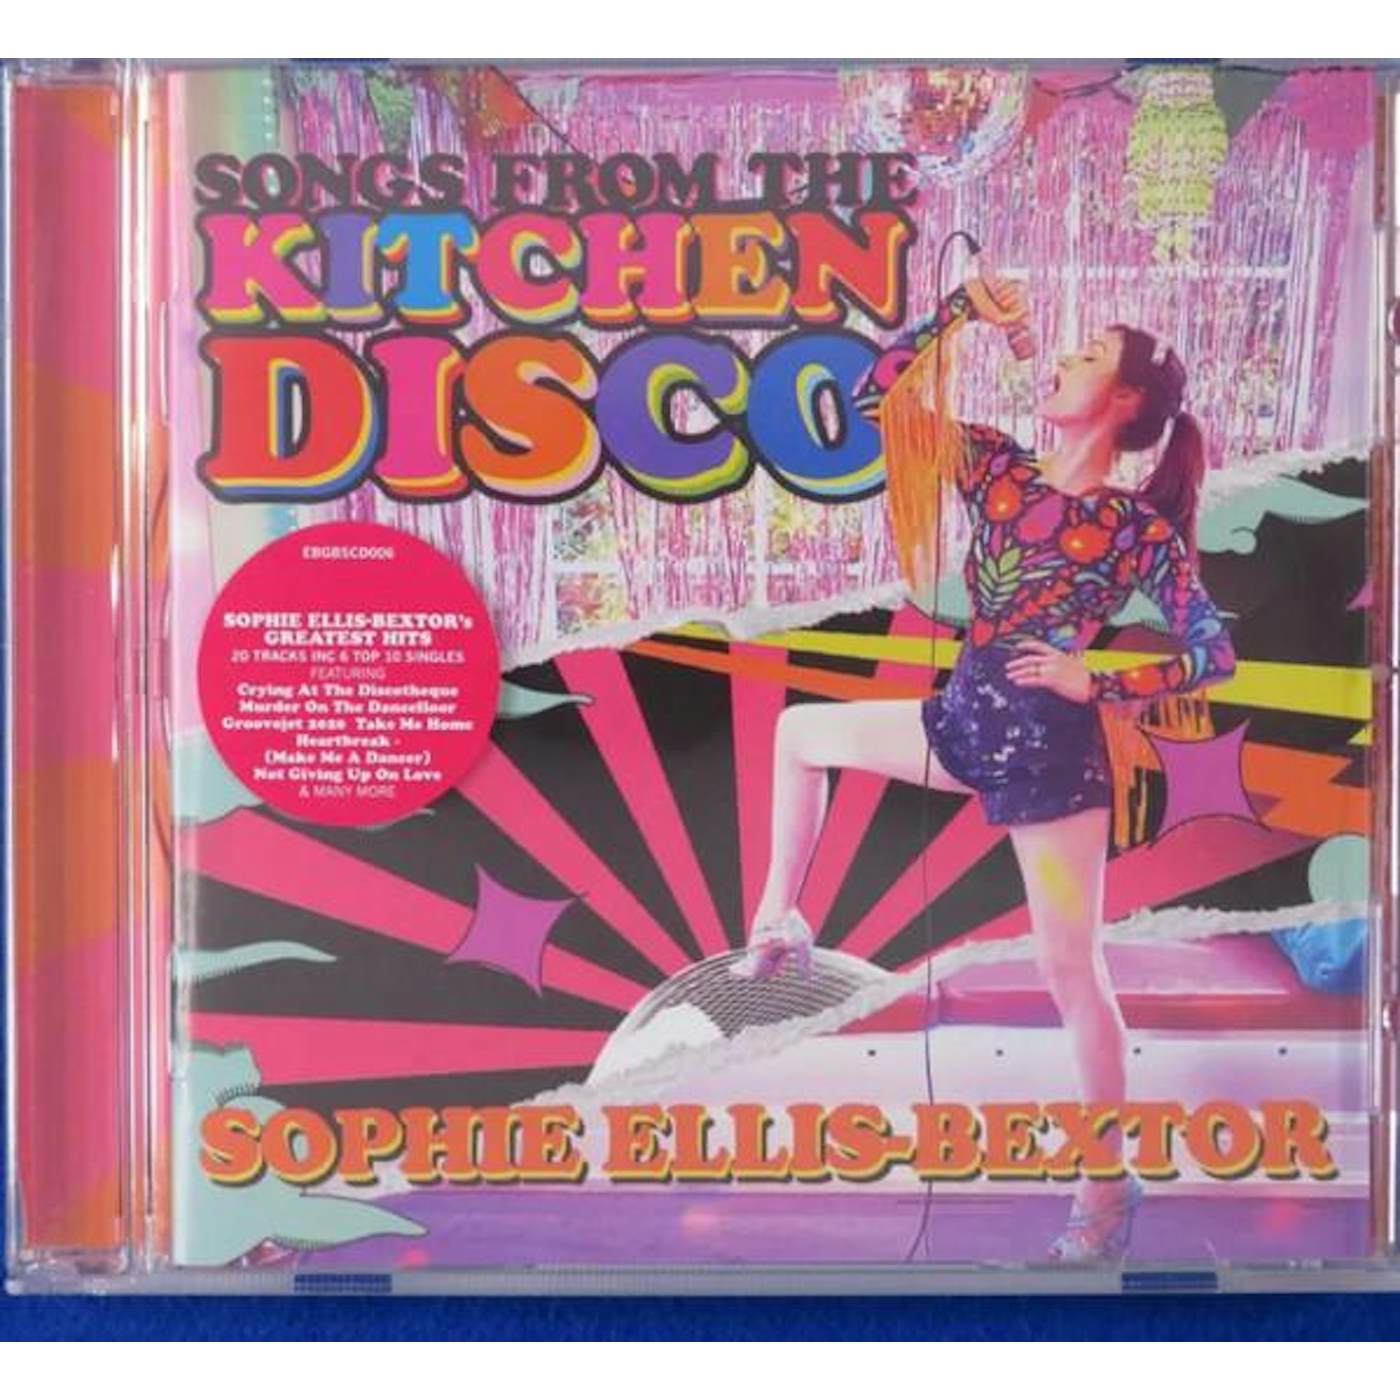 SONGS FROM THE KITCHEN DISCO: SOPHIE ELLIS-BEXTOR'S GREATEST HITS CD